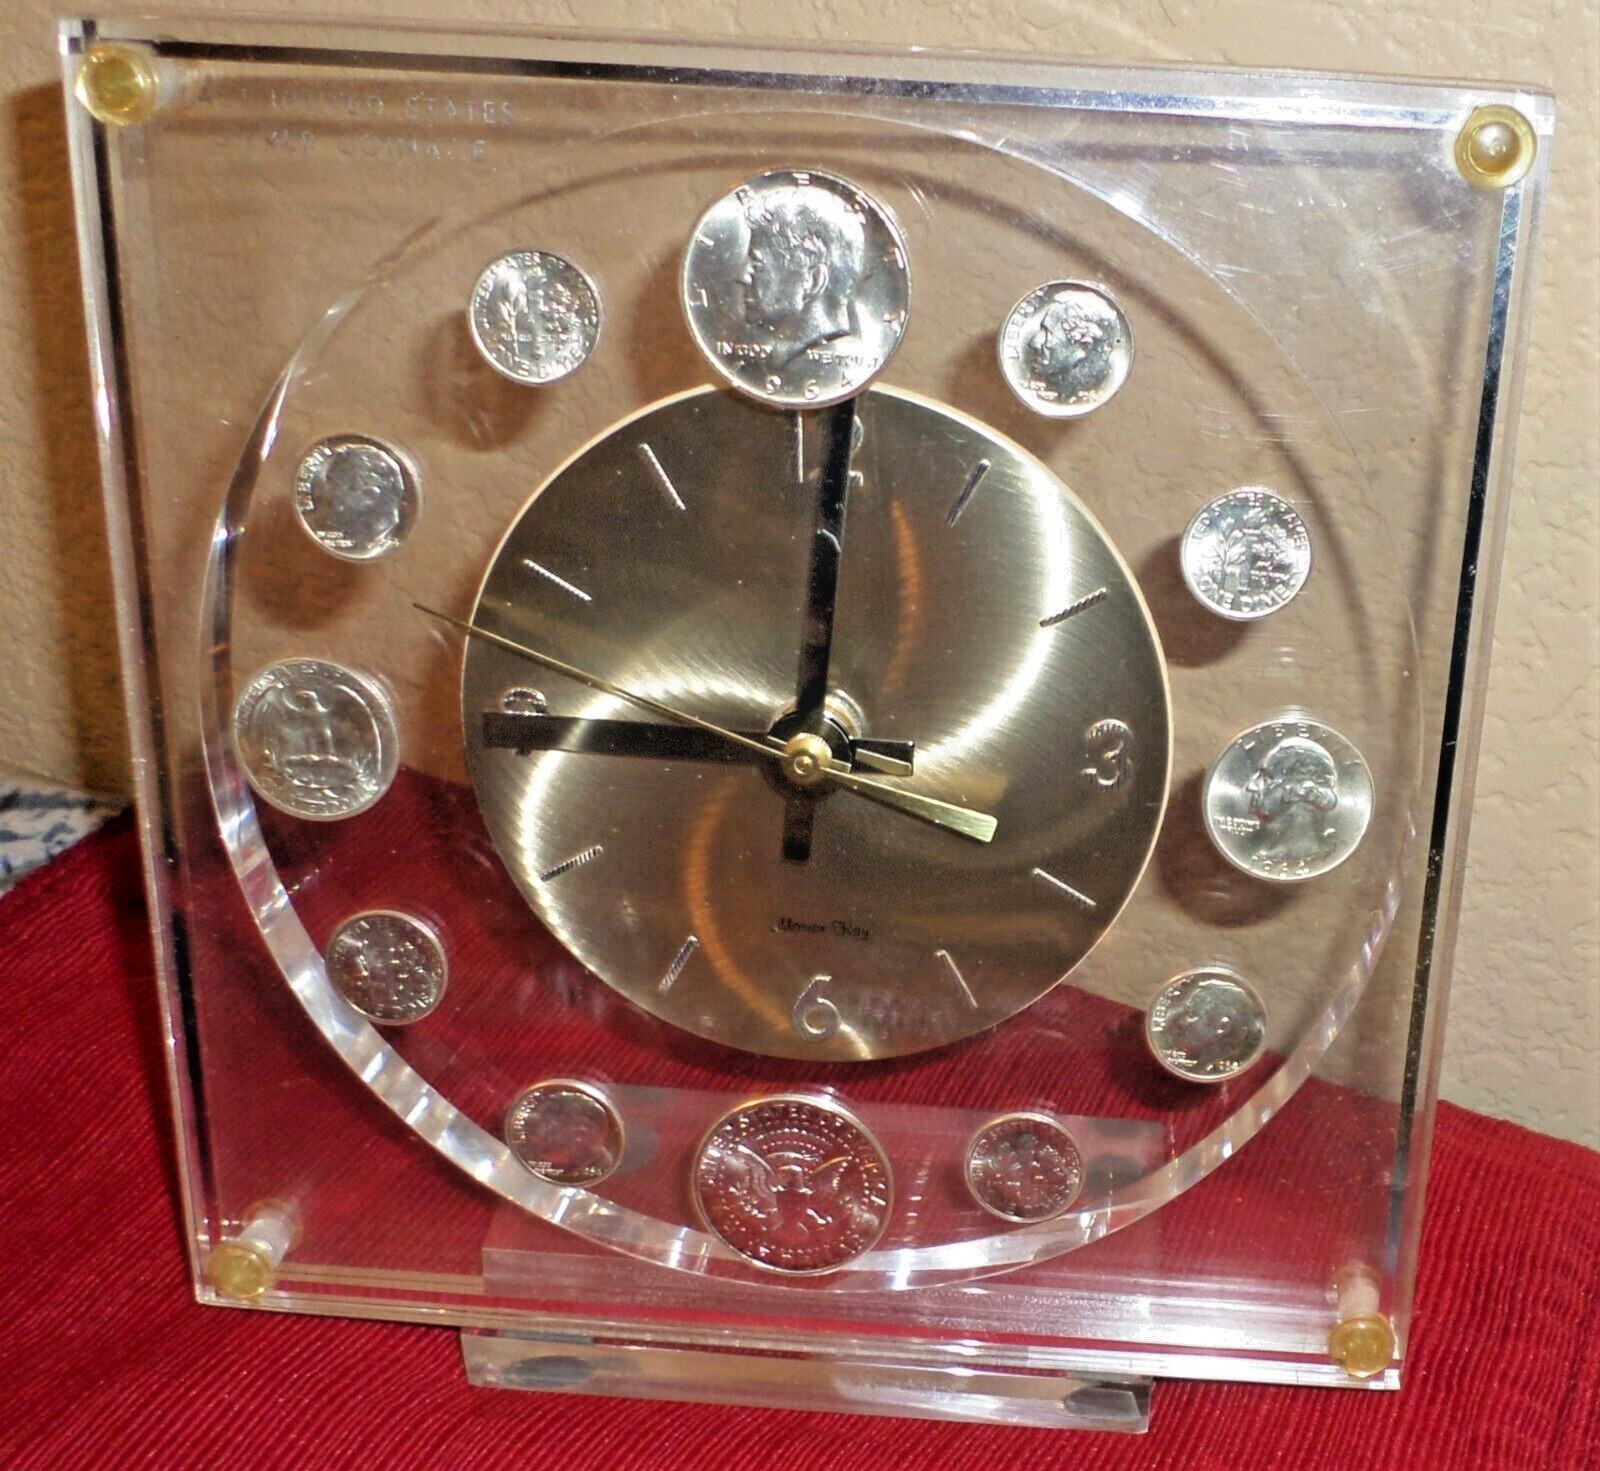 RARE UNUSUAL MARION KAY LAST UNITED STATES SILVER COINAGE DESK OR MANTEL CLOCK